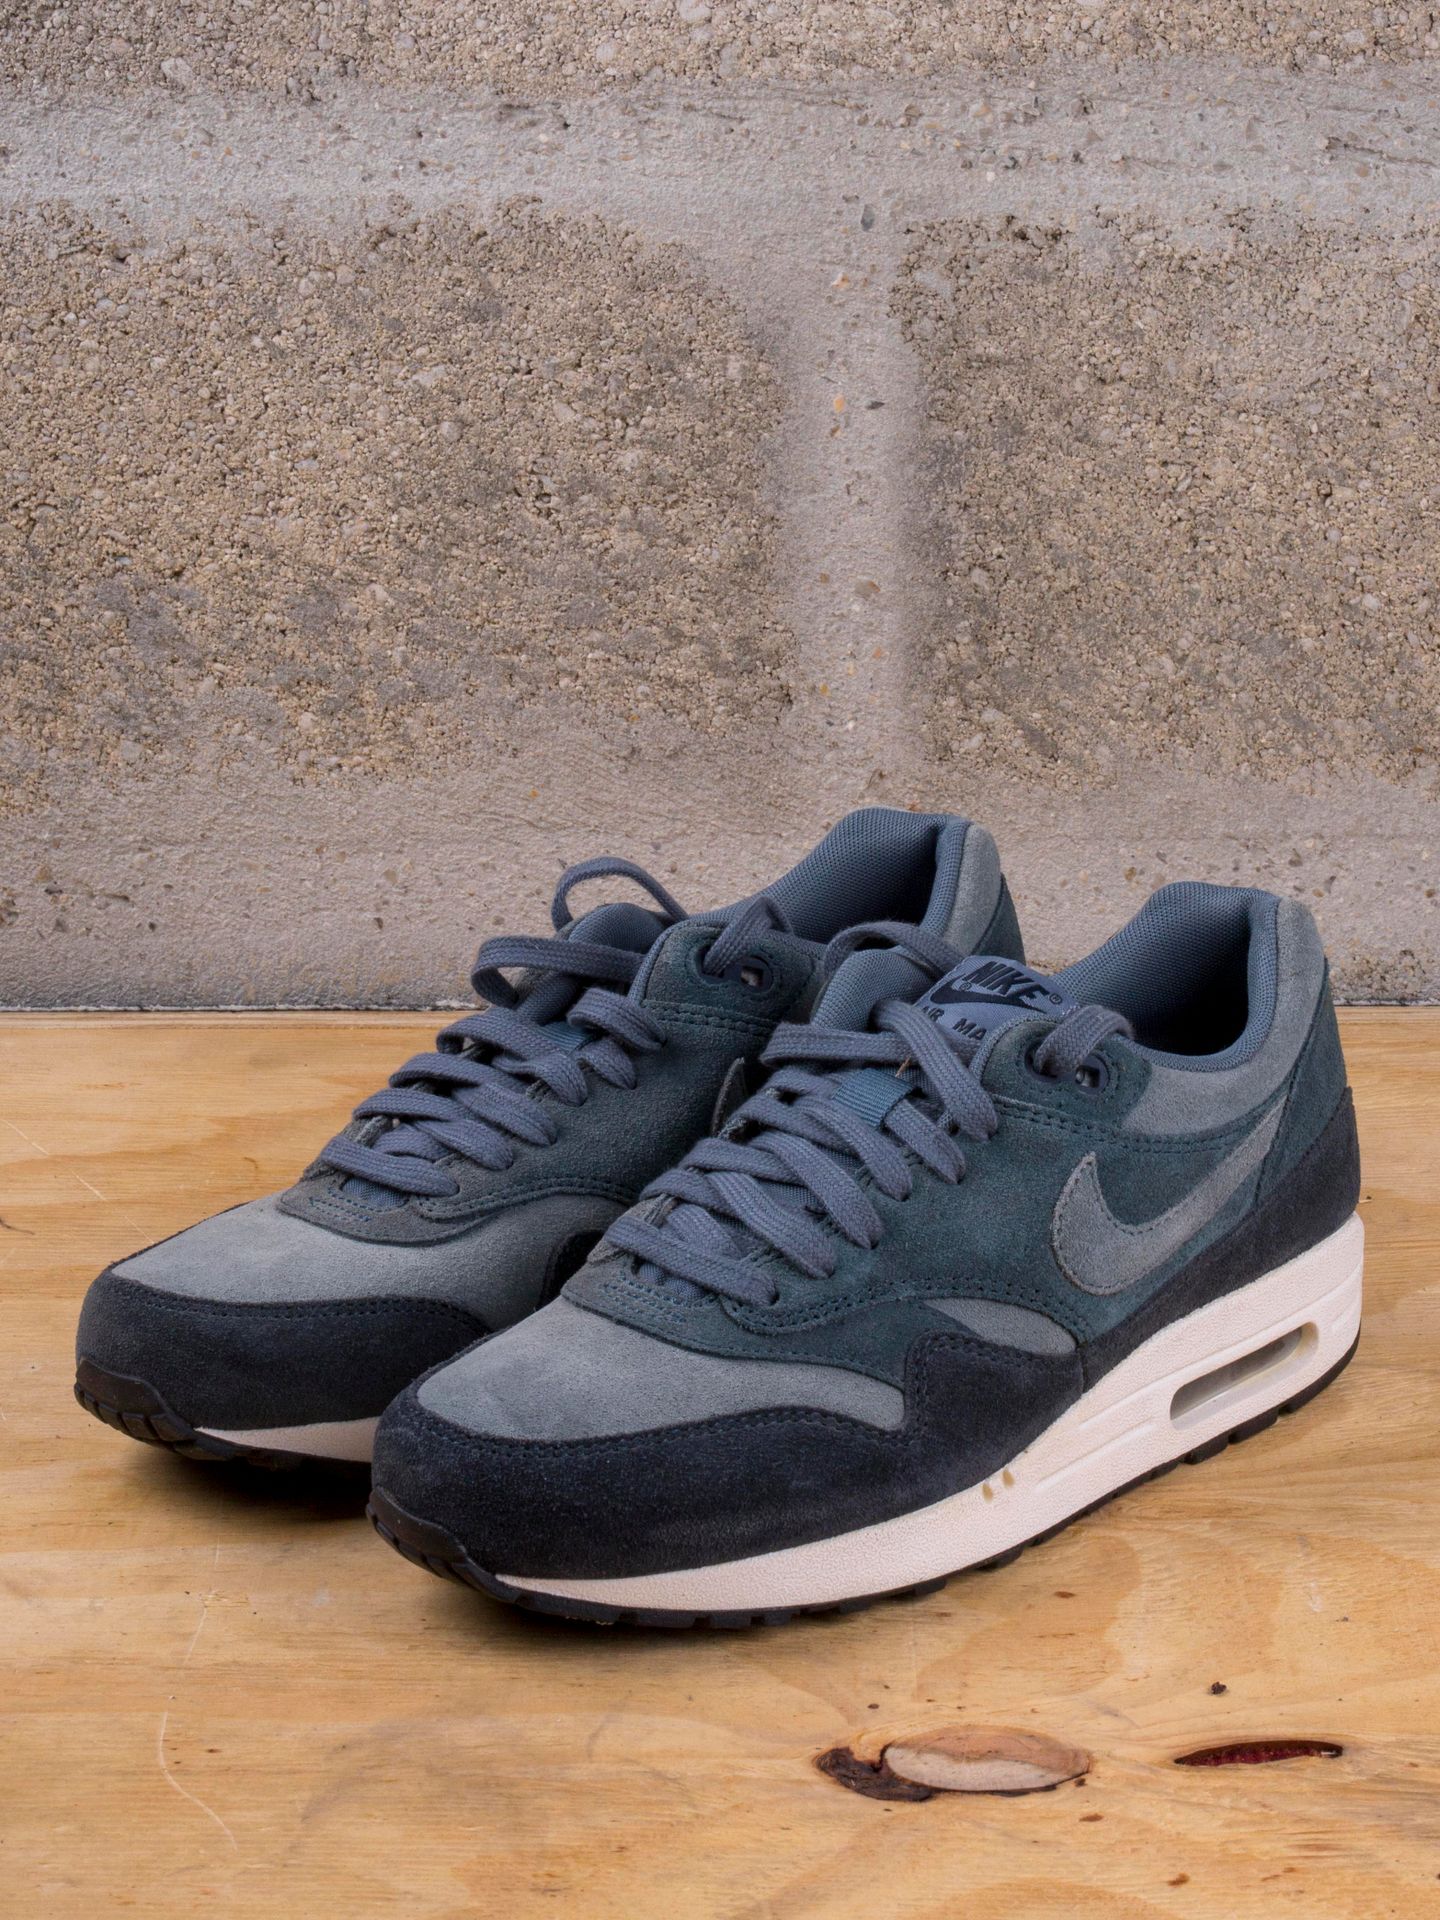 Null NIKE AIR MAX 1

Armory Slate

(599301-444)

US 8 / EU 41

(Sehr guter Zusta&hellip;